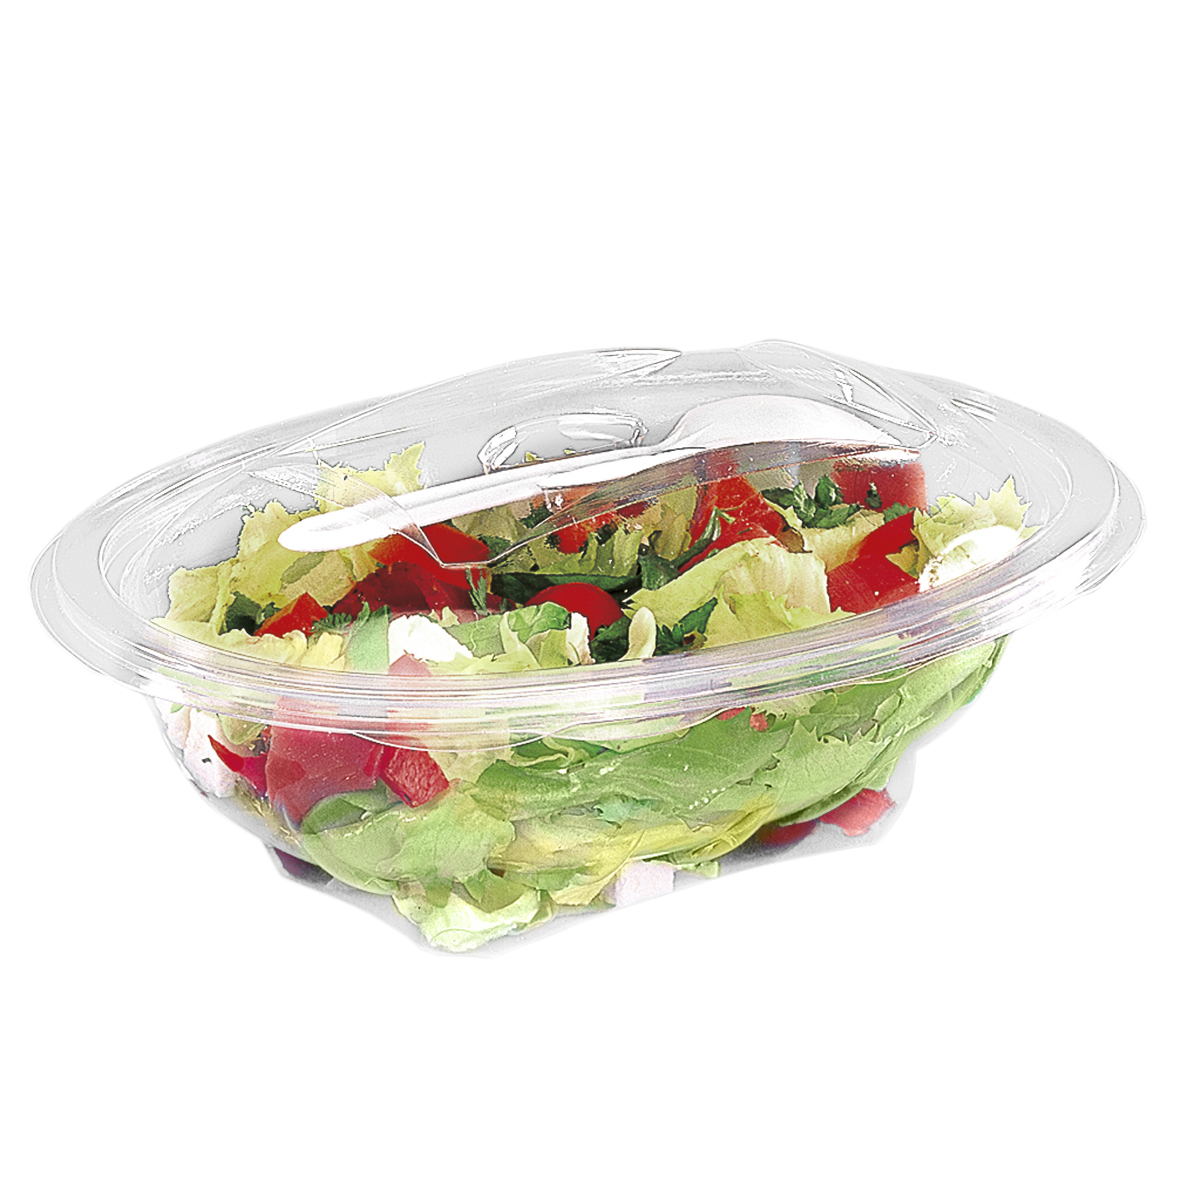 Sekipack Oval Food Container, incl. Spork 750 ml